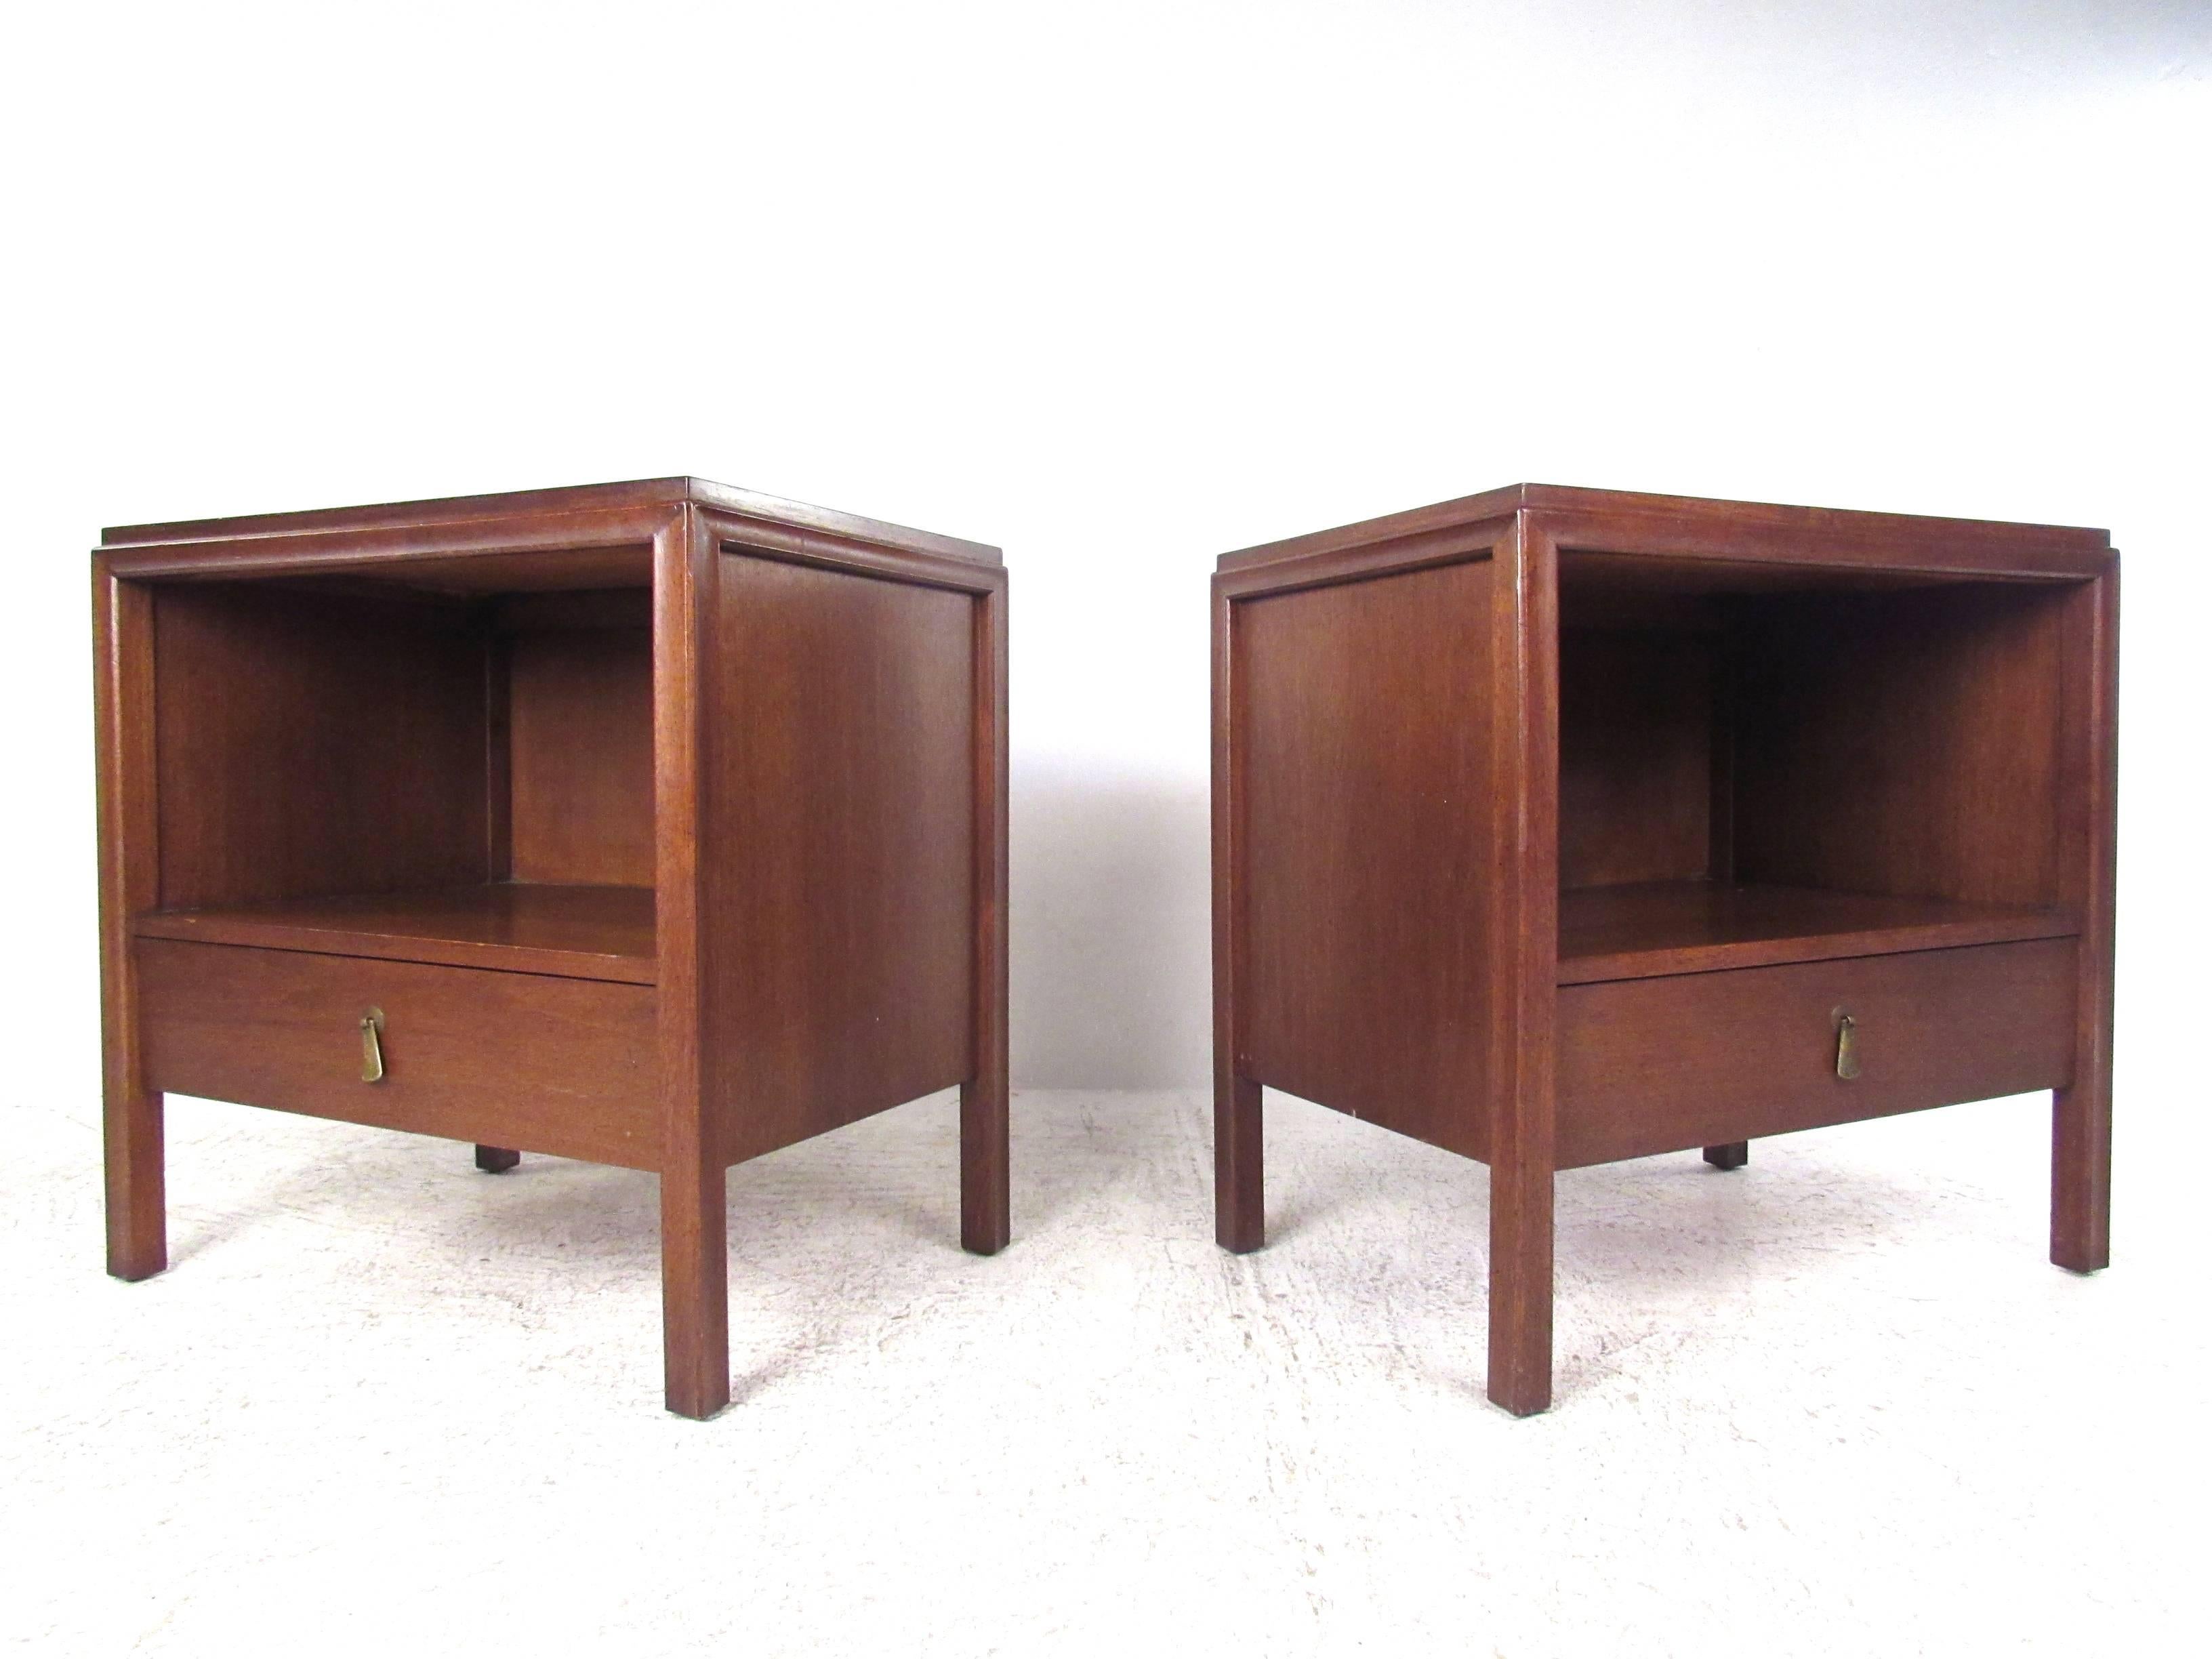 This vintage pair of bedside tables features the Classic Mid-Century style of John Stuart, and offer plenty of convenient storage with spacious cabinet and additional drawer. Unusual hanging brass pulls, a finished back, and a rich vintage walnut